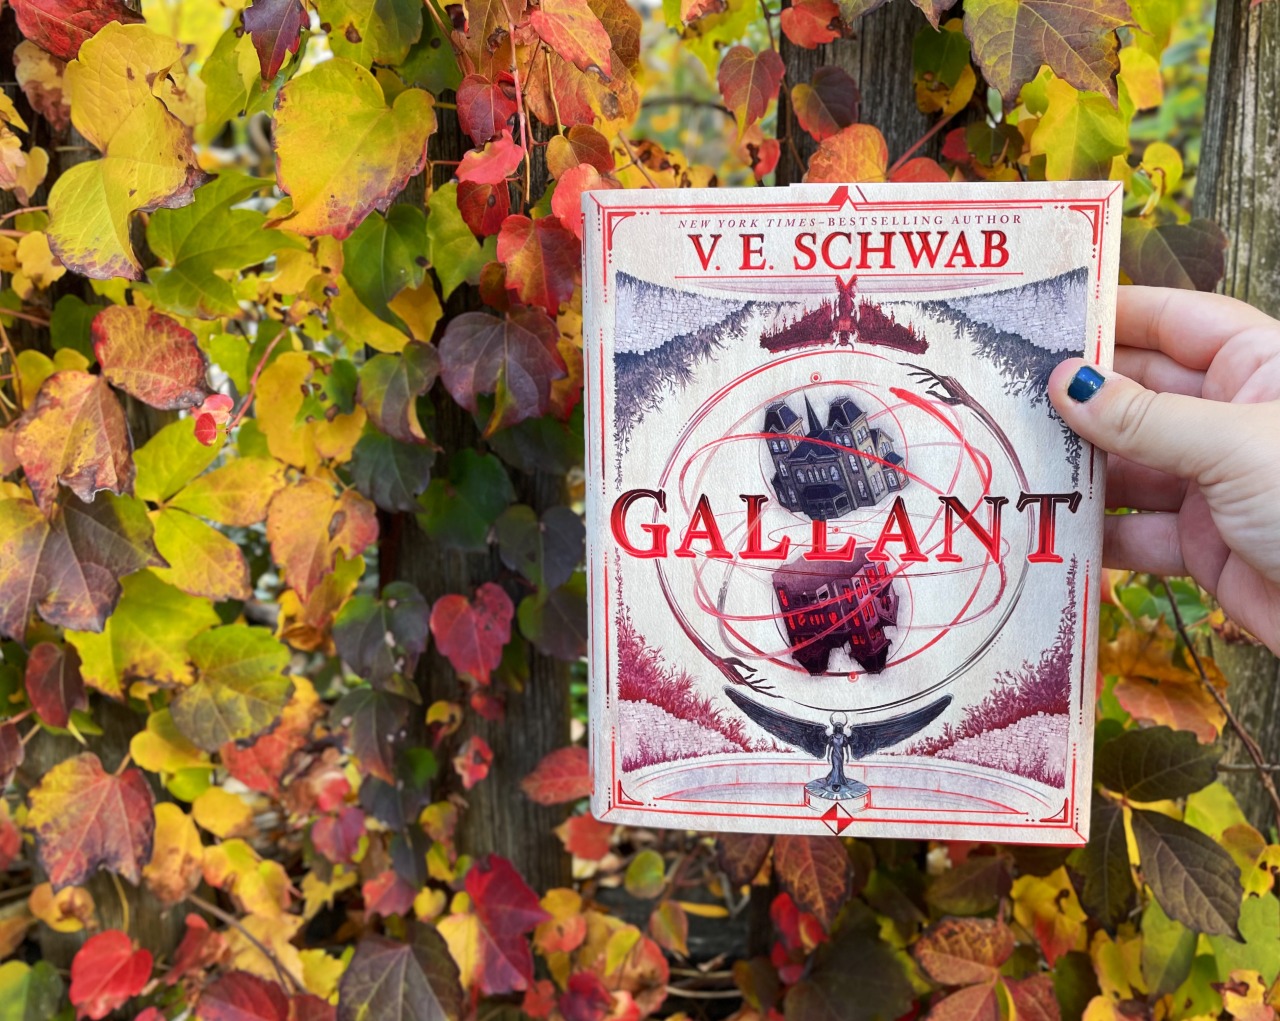 Gallant by VE Schwab was a perfect Halloween weekend read. Olivia Prior has grown up at the harsh boarding school Merilance, watching ghouls that no one else can see wander down its corridors, sneaking into the hallways at night. Now she’s called by...